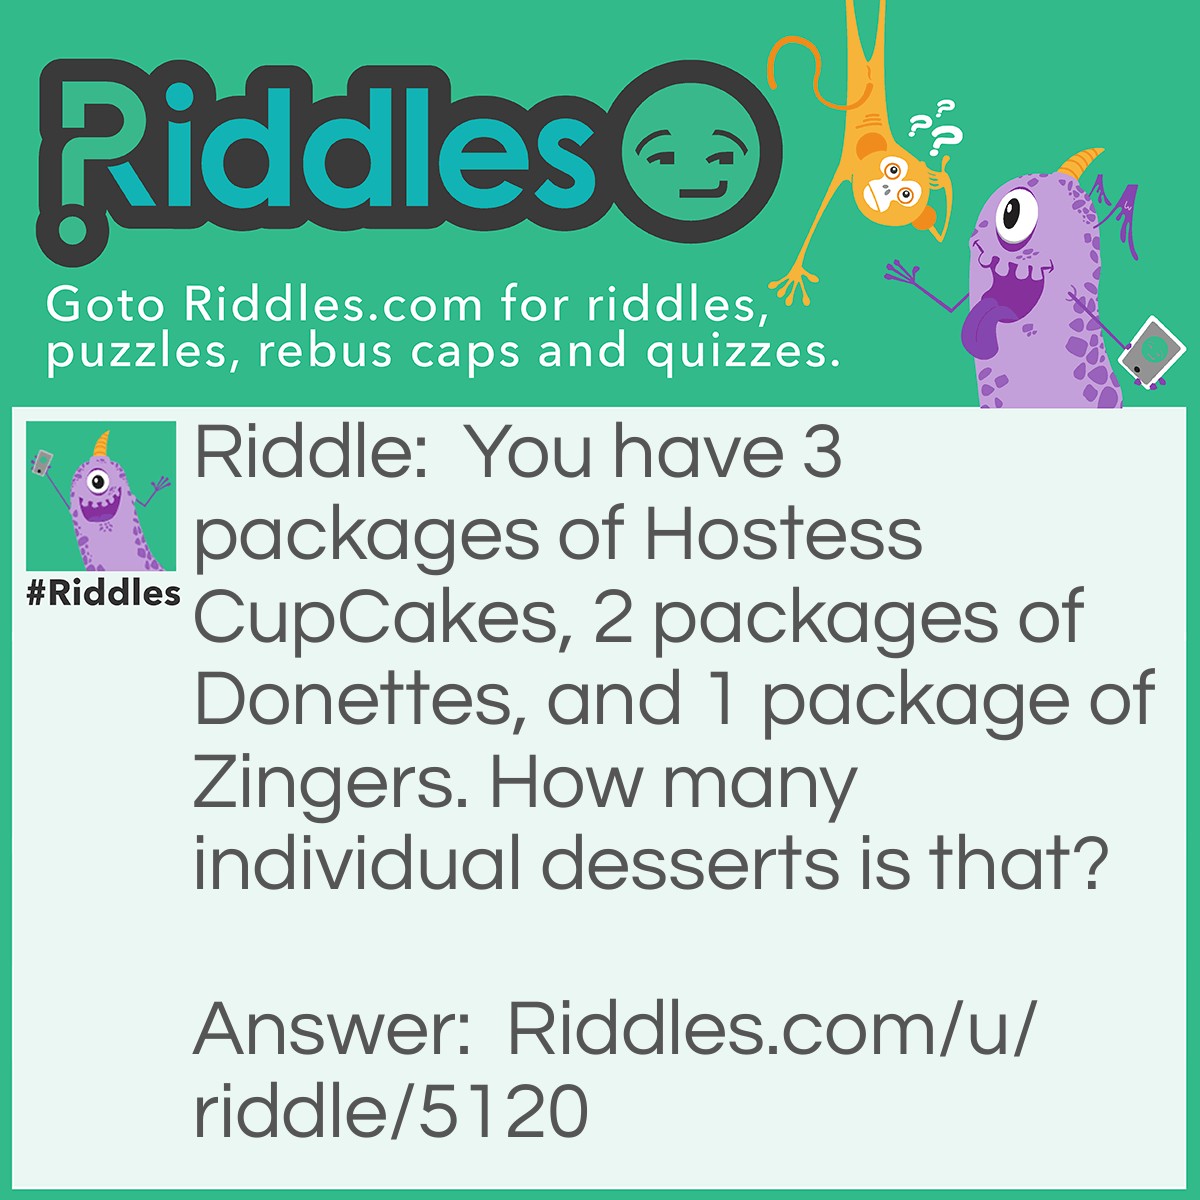 Riddle: You have 3 packages of Hostess CupCakes, 2 packages of Donettes, and 1 package of Zingers. How many individual desserts is that? Answer: Okay, first of all, you REALLY got to know your desserts. CupCakes come in a package of 2, so 2 x 3 = 6. Donettes come in a package of 6, so 6 + 6 + 6 = 18. Zingers come in a package of 3, so 18 + 3 = 21. Total desserts: 21!